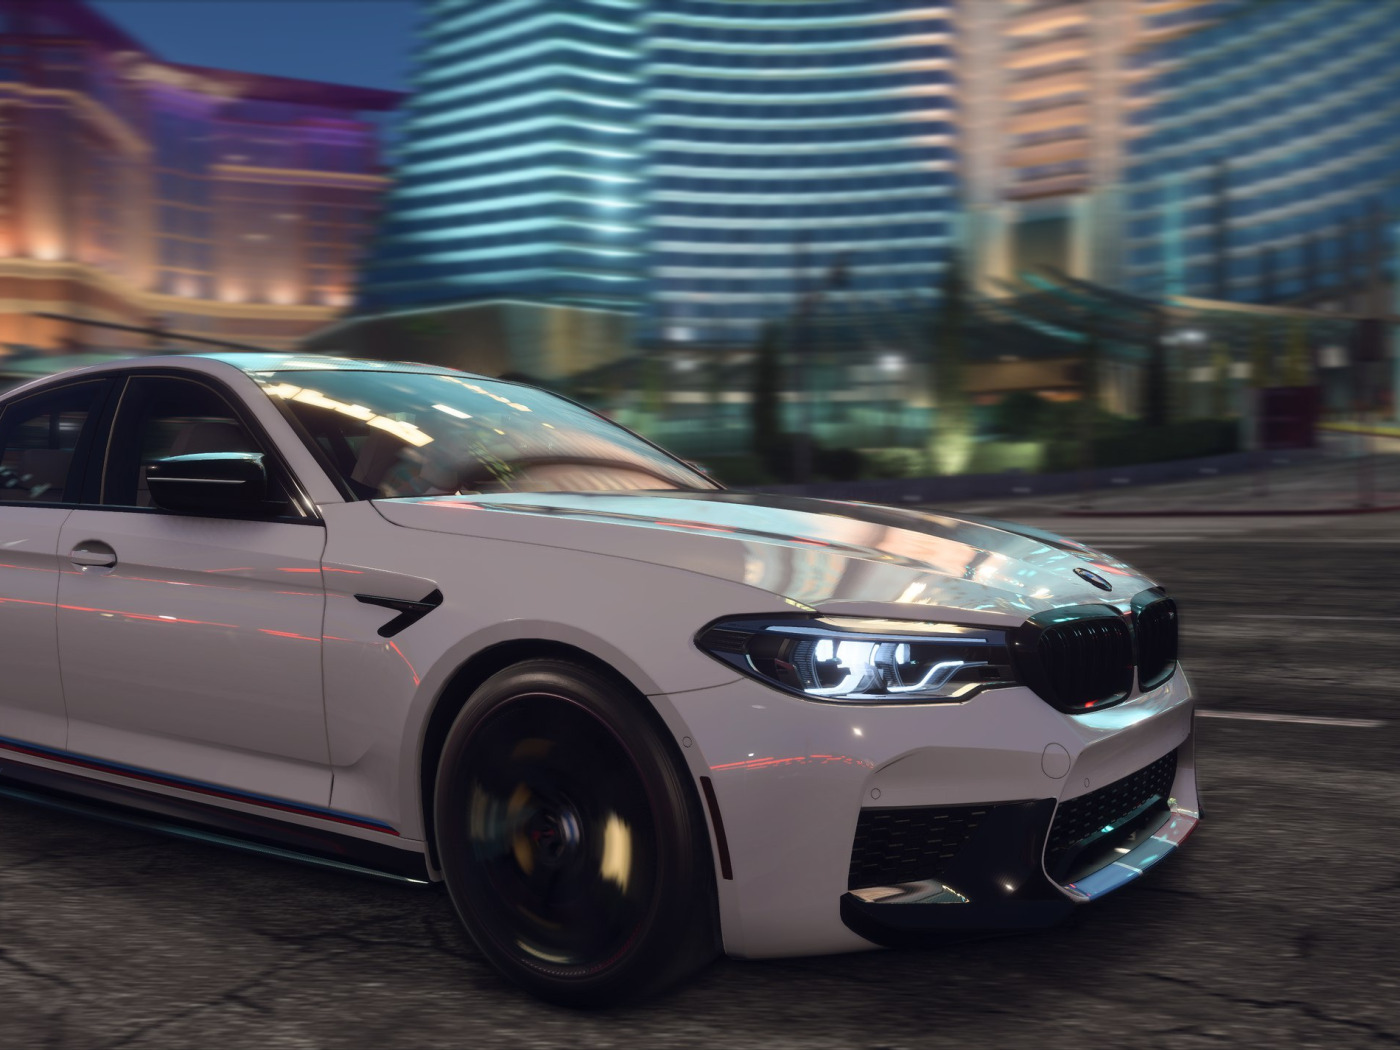 Need for speed 2017. BMW m5 Payback. BMW m5 2017 NFS Payback. BMW m5 f90 NFS Payback. BMW m5 f90 need for Speed Payback.